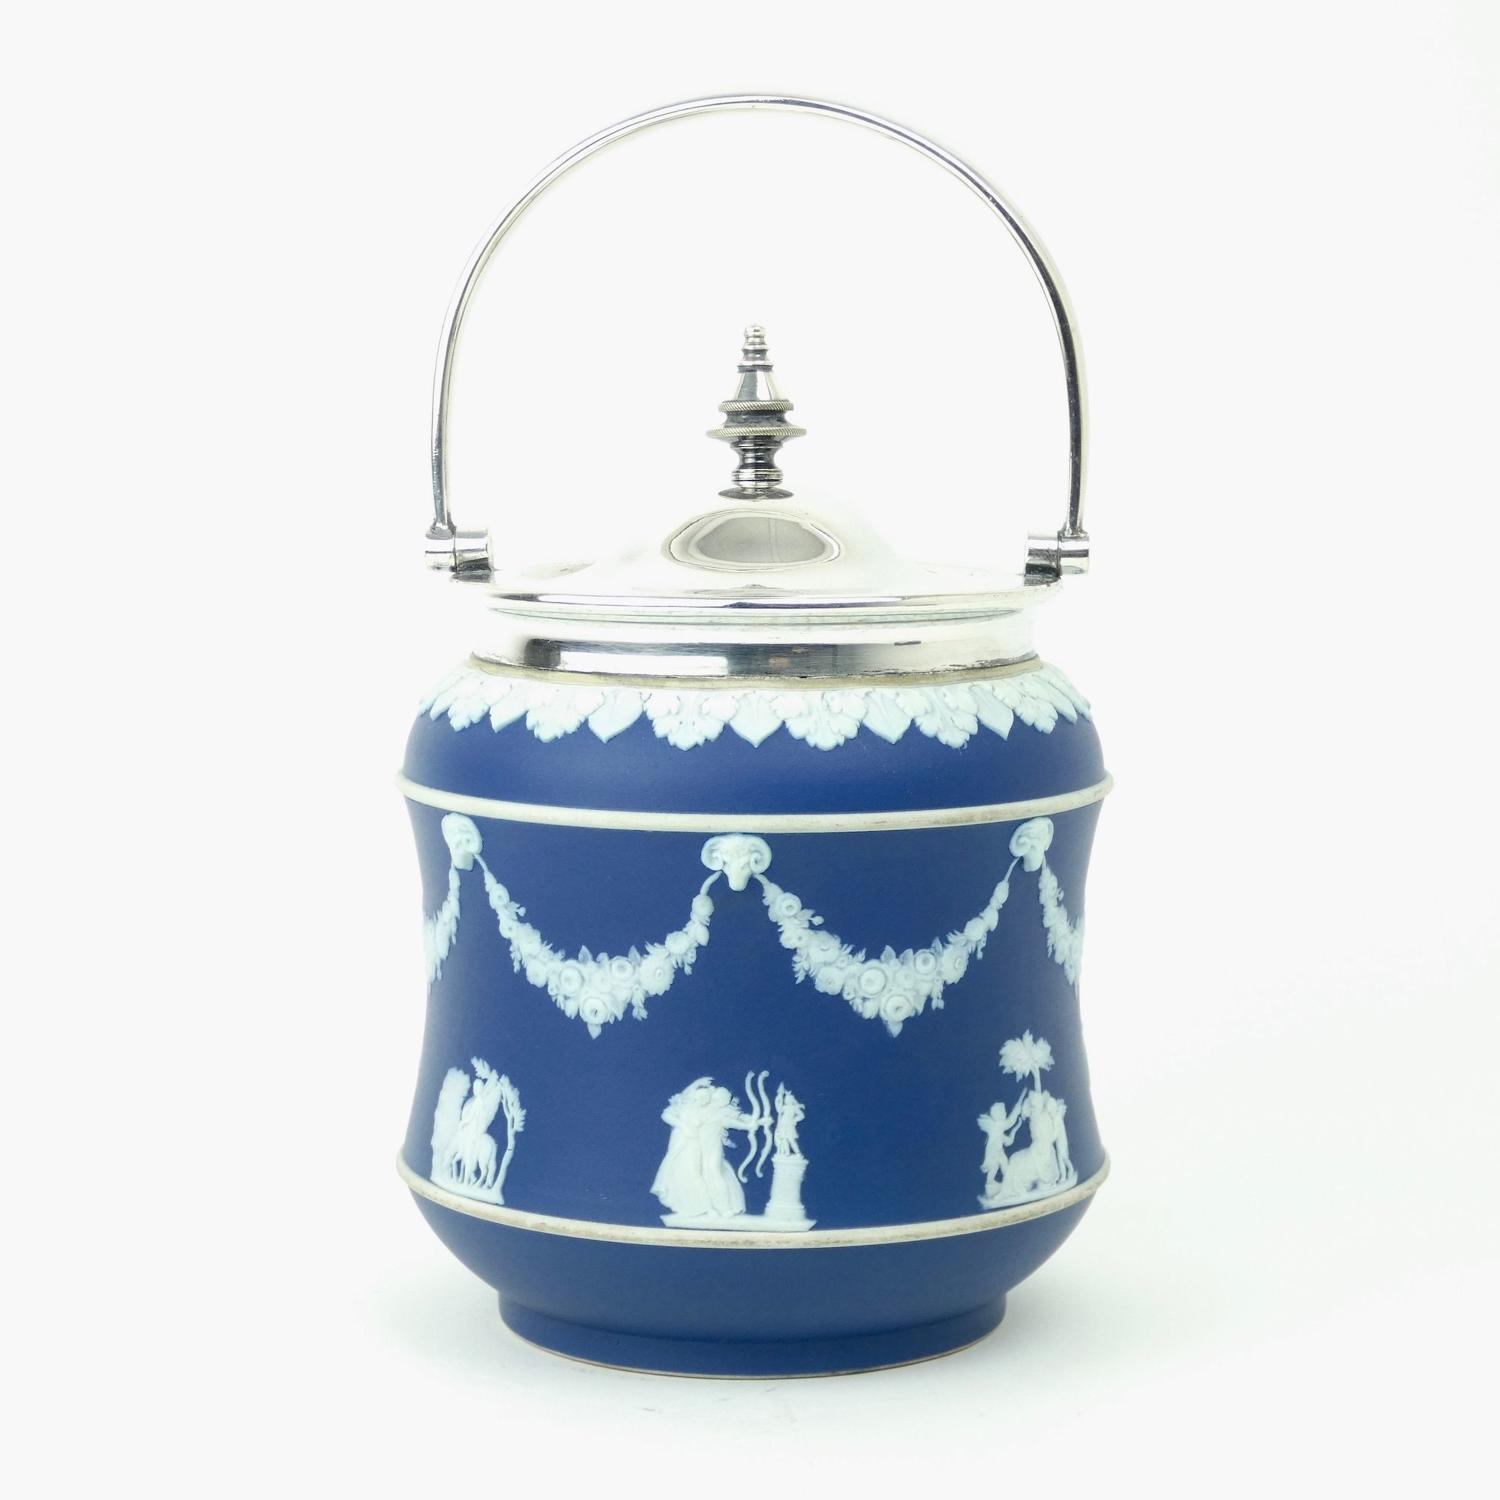 Wedgwood biscuit barrel with plated mounts